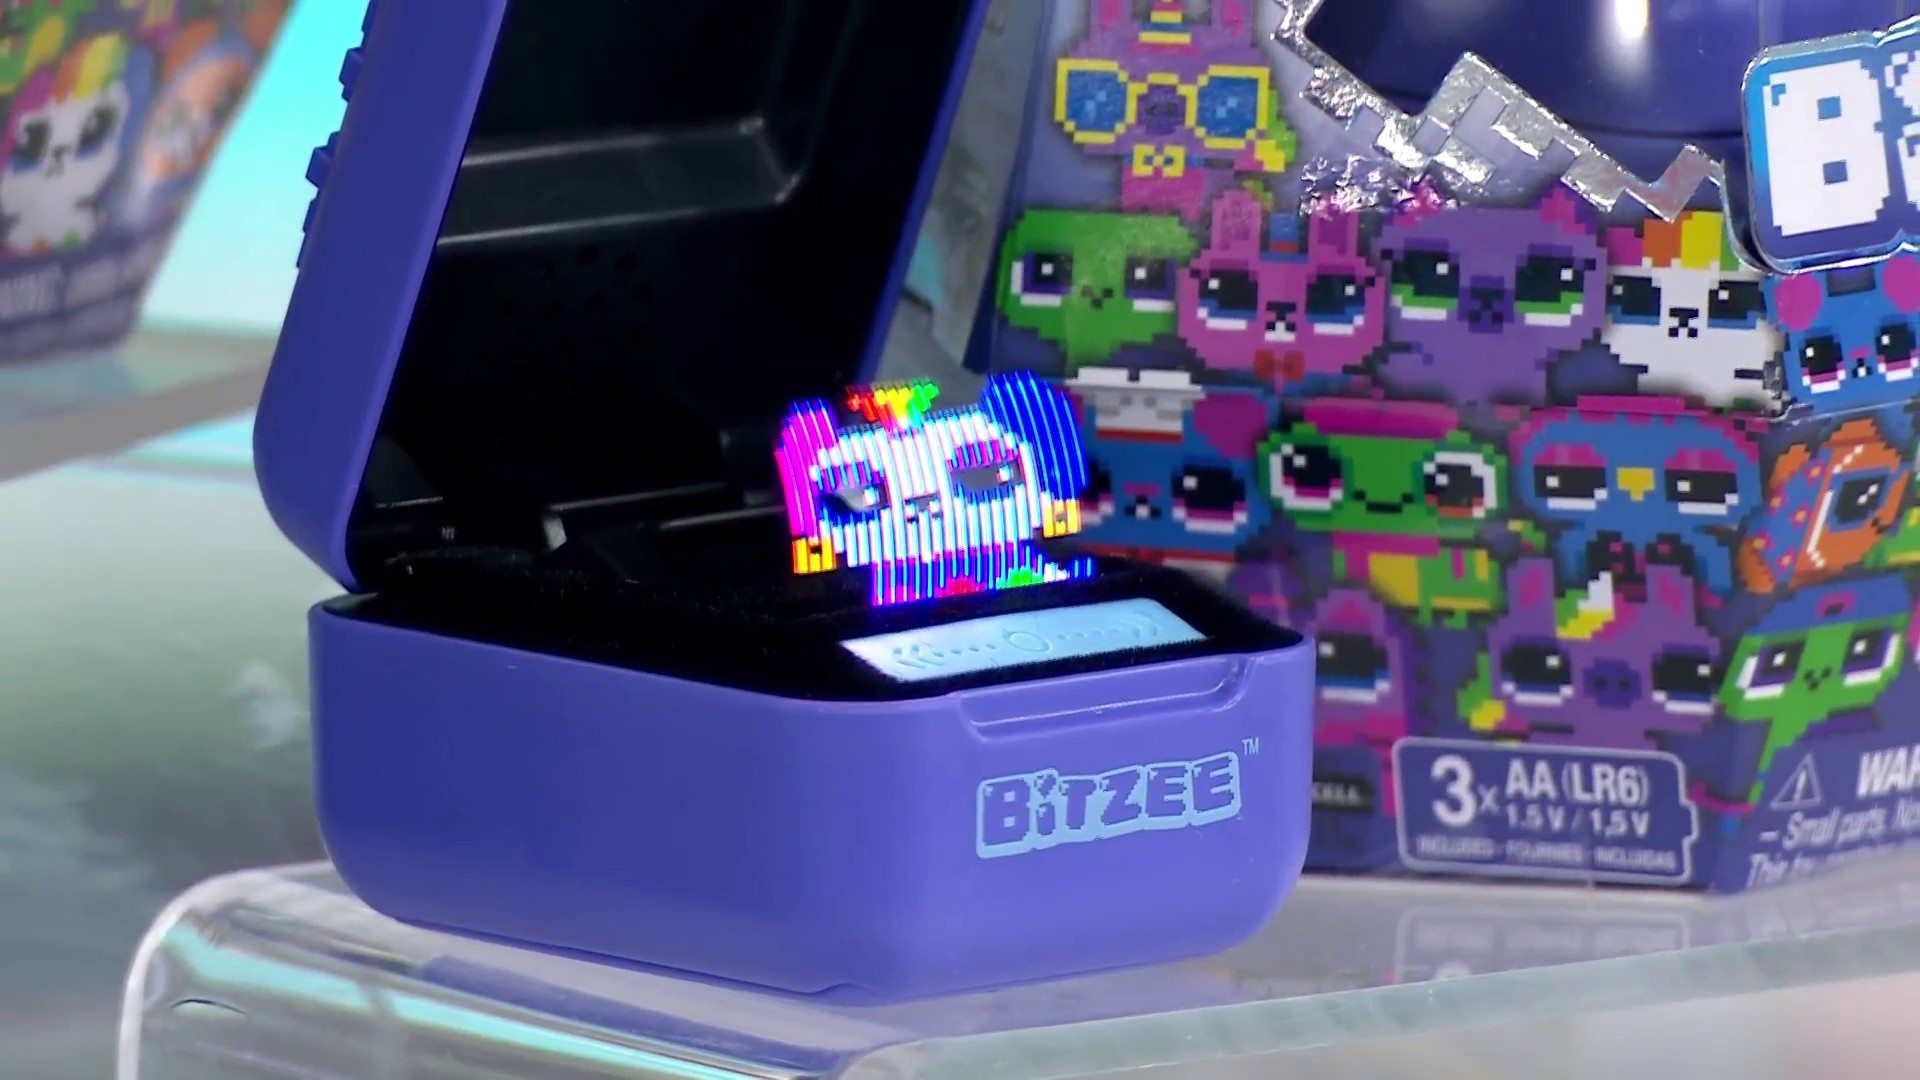 Bitzee' is the next holiday fad — and it's flying off shelves